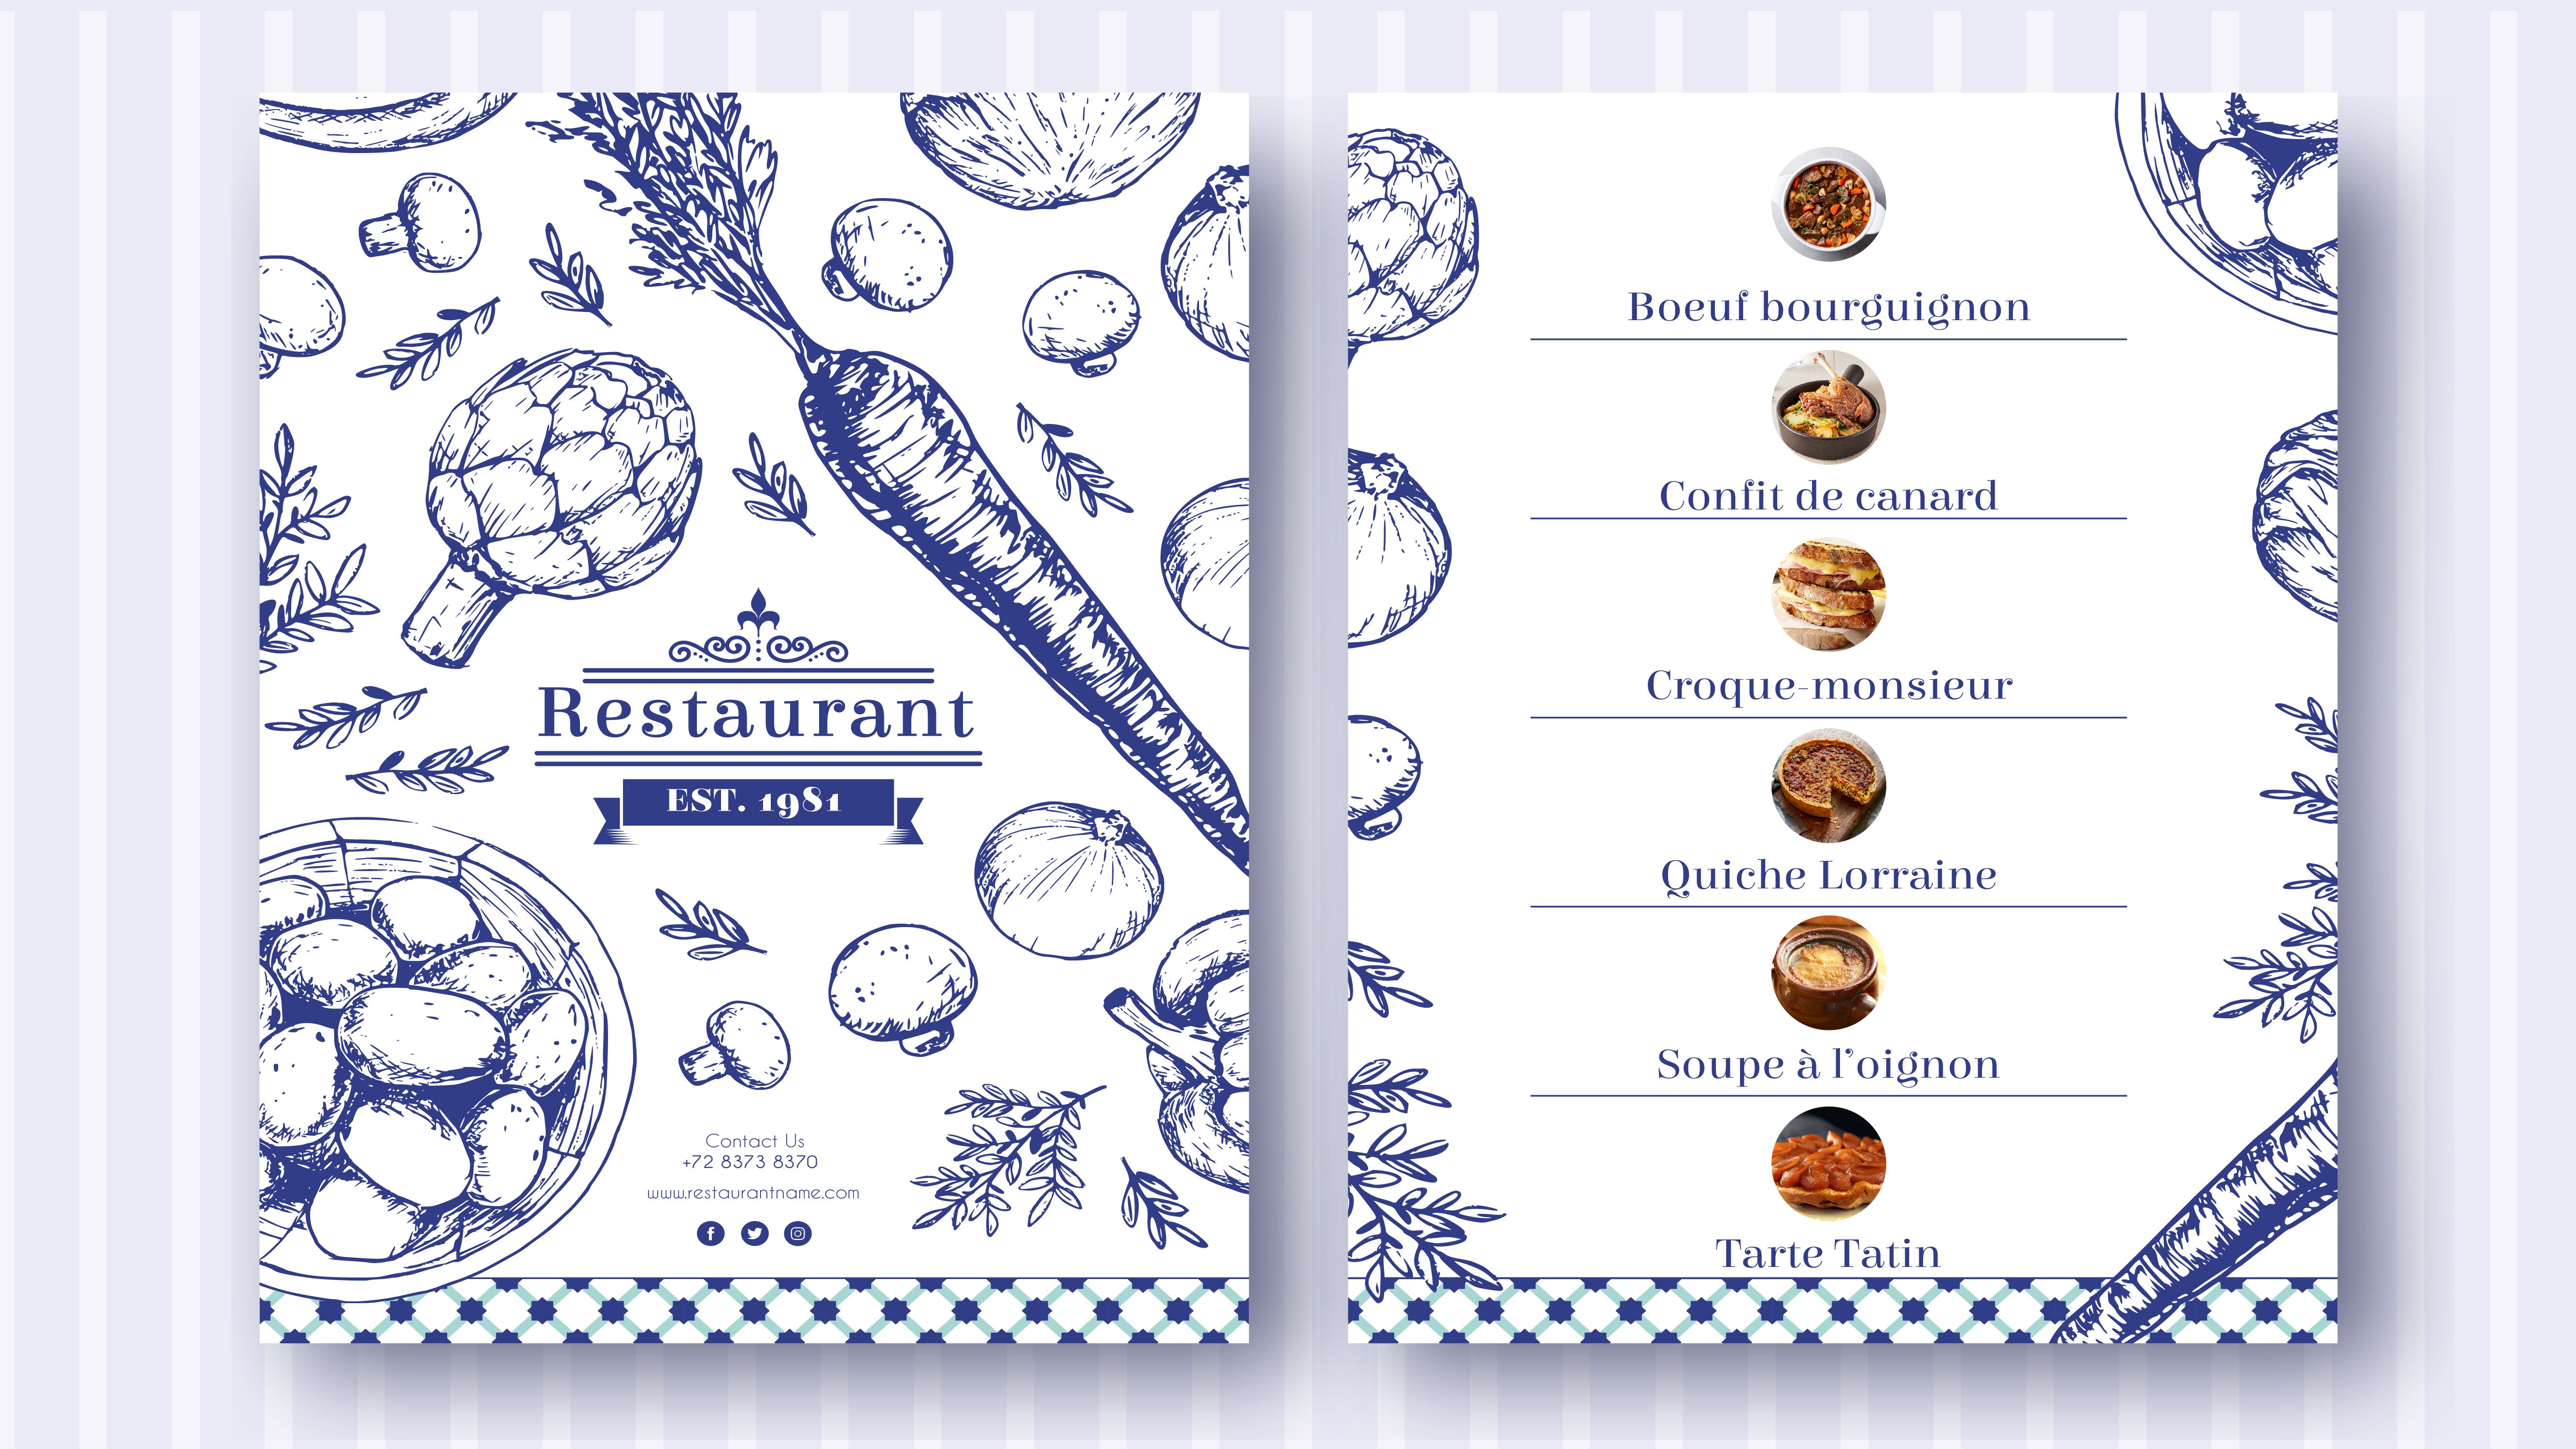  A menu at a French restaurant, with names of dishes and small images of these dishes next to them